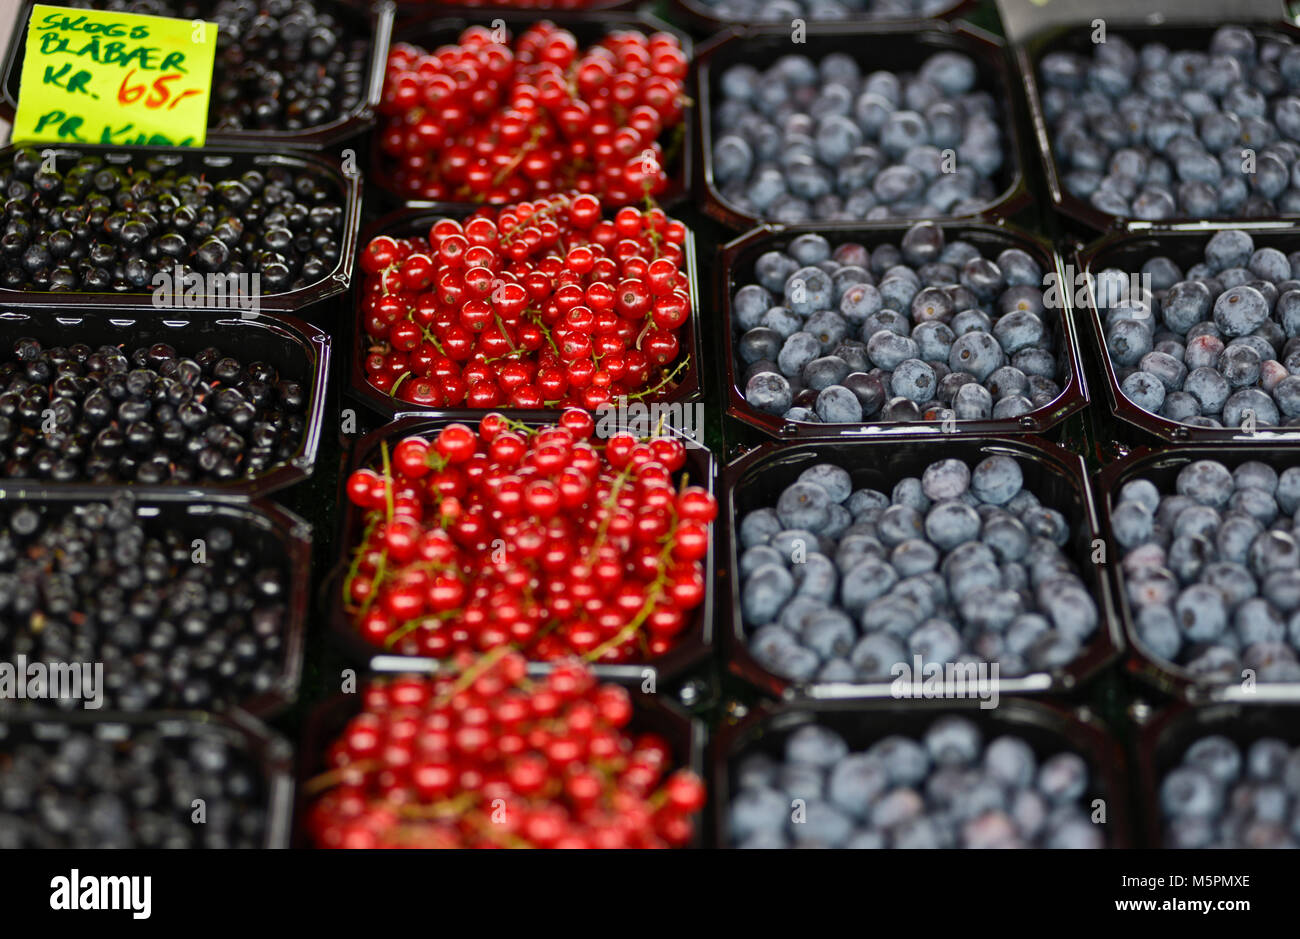 Variety of berries (blackberry, red berry, blueberry) for sale, Fish Market  - Fisketorget, Bergen, Norway Stock Photo